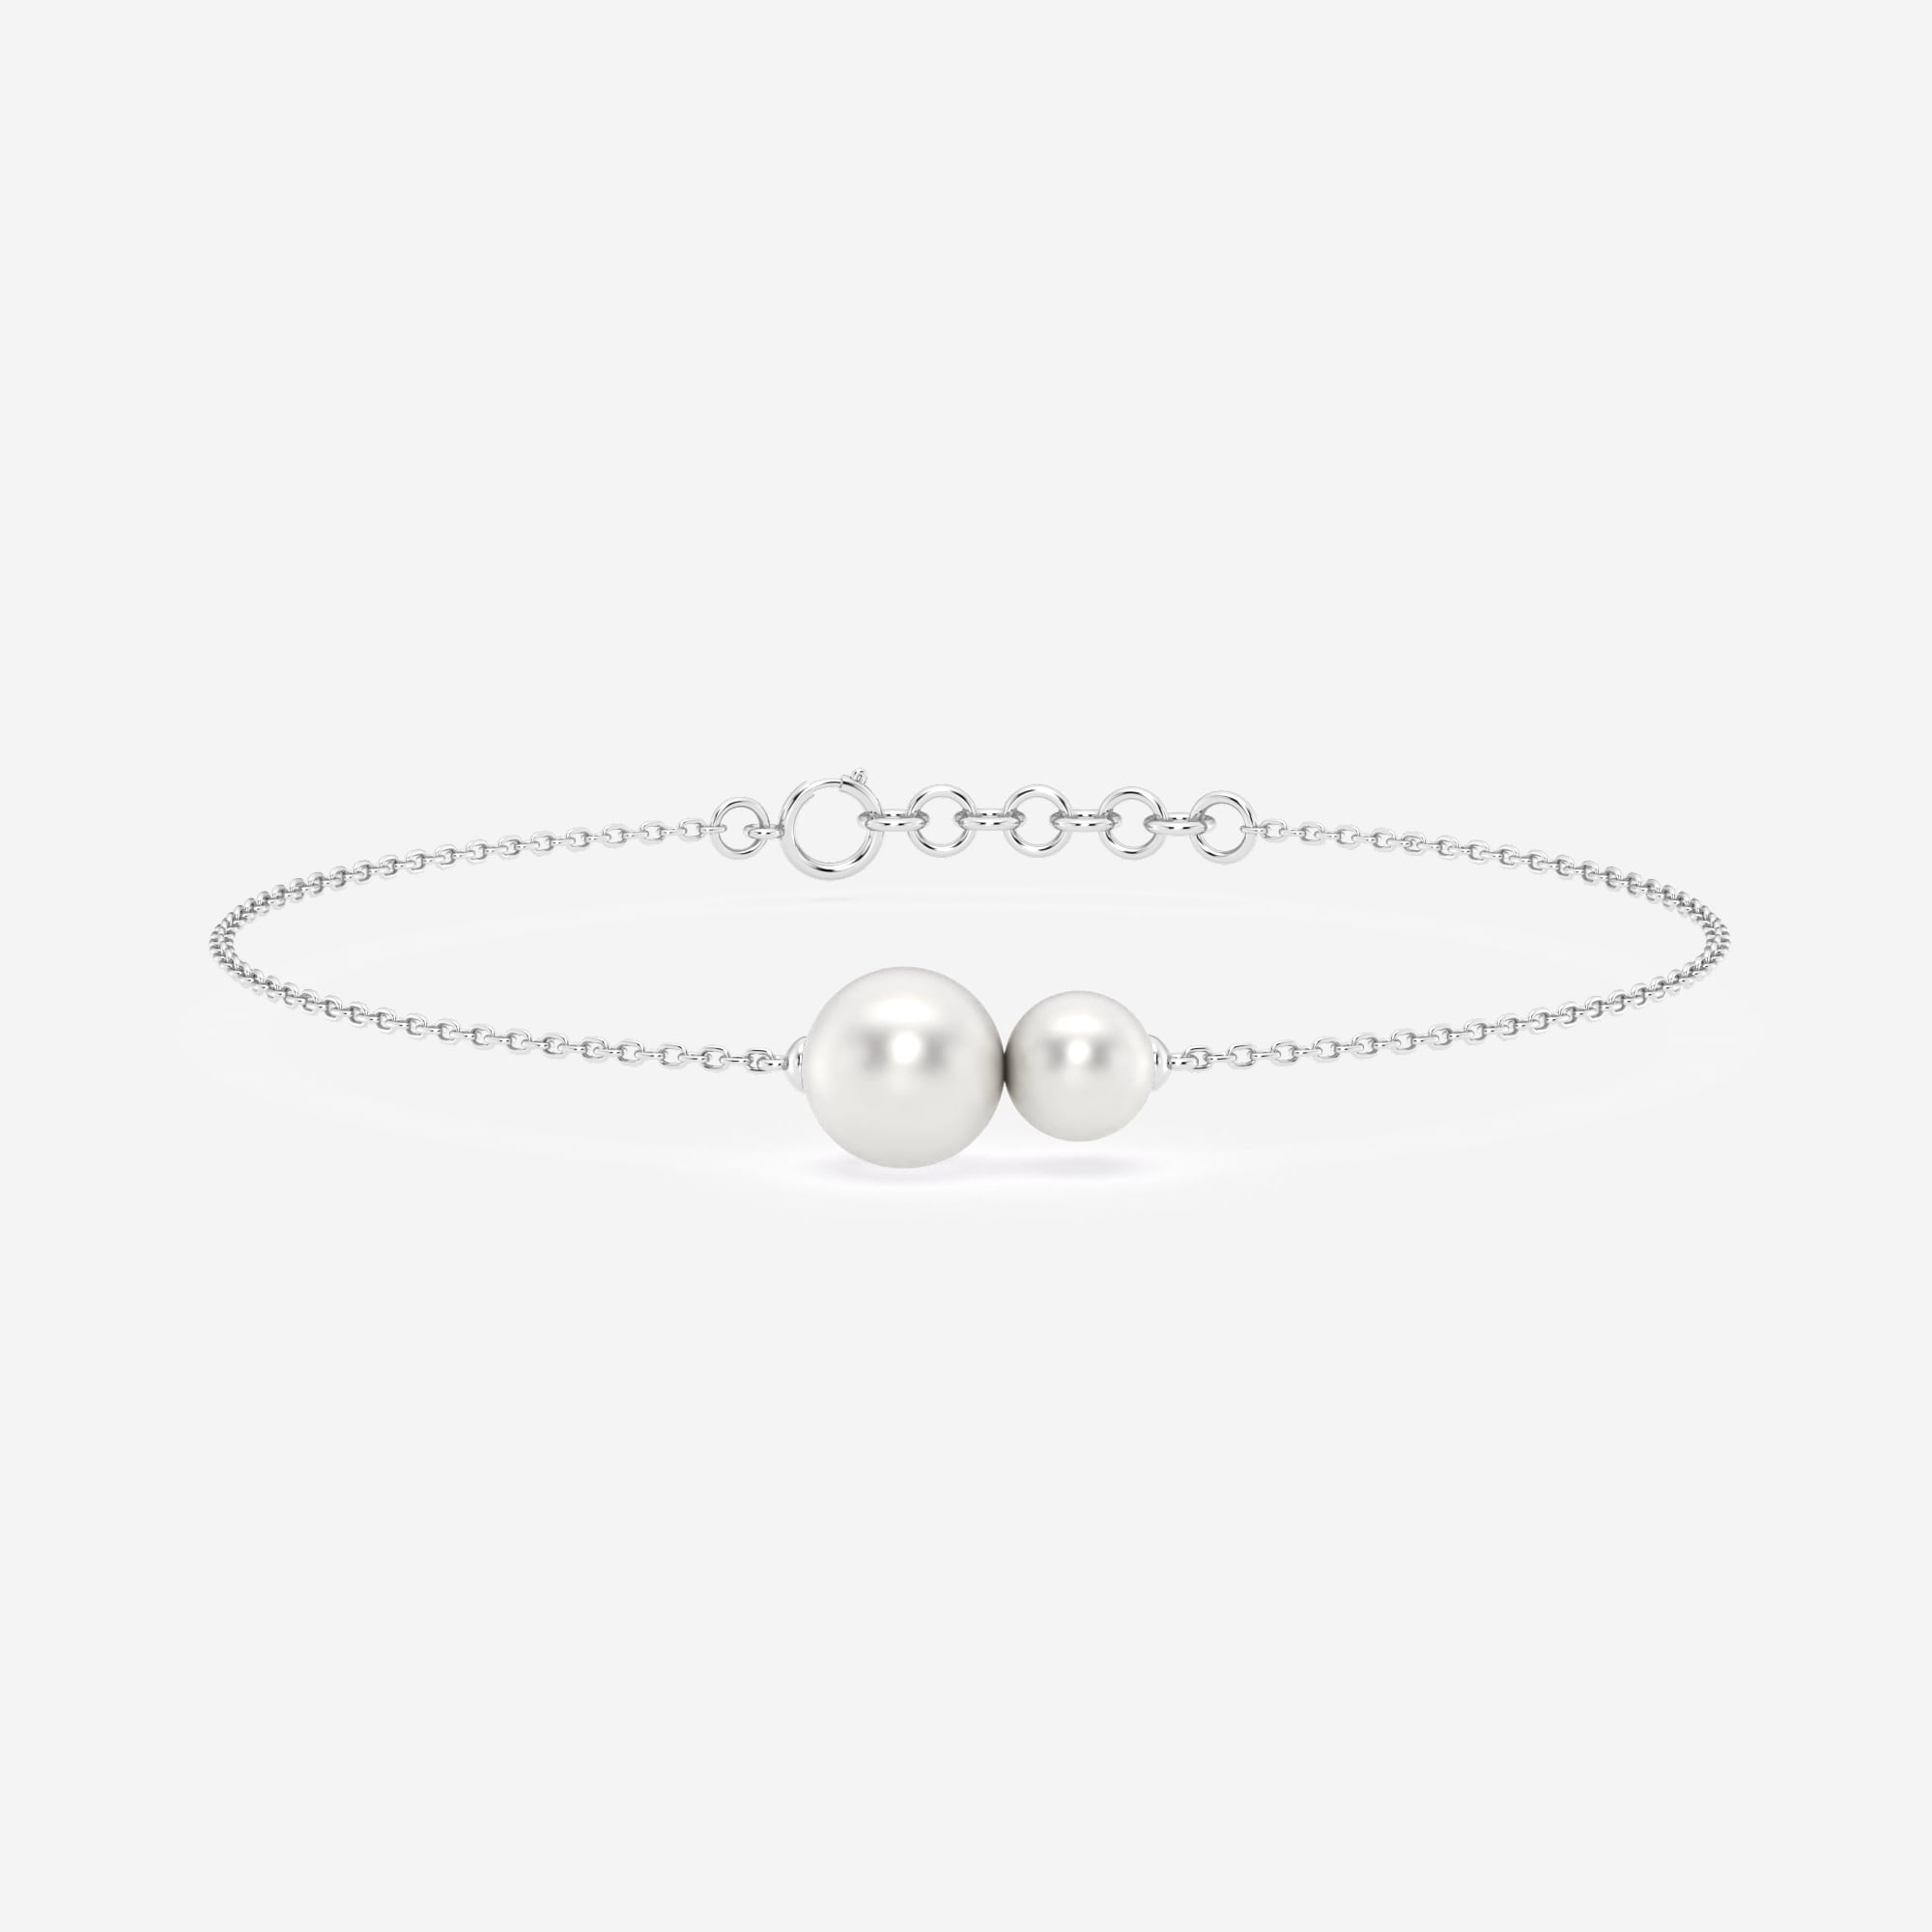 product video for 5.5 - 8.0 mm Cultured Freshwater Pearl Double Stone Adjustable Chain Bracelet - 7-8 Inches